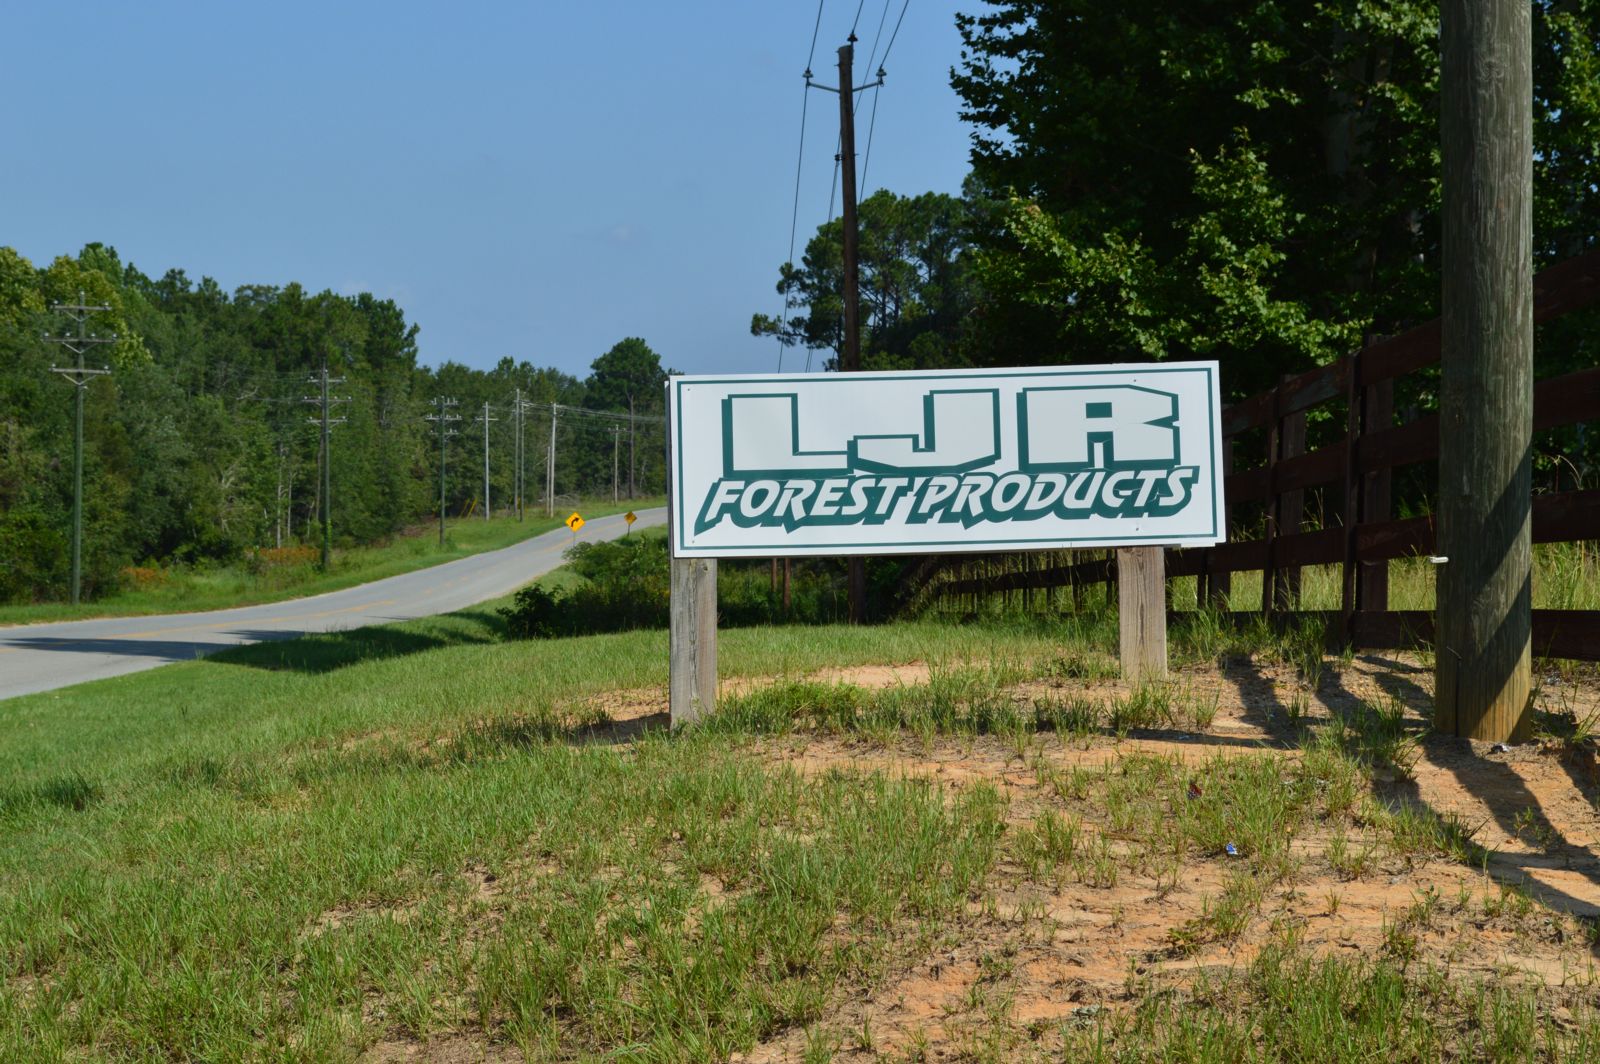 a photo of the LJR forest products sign beside a road